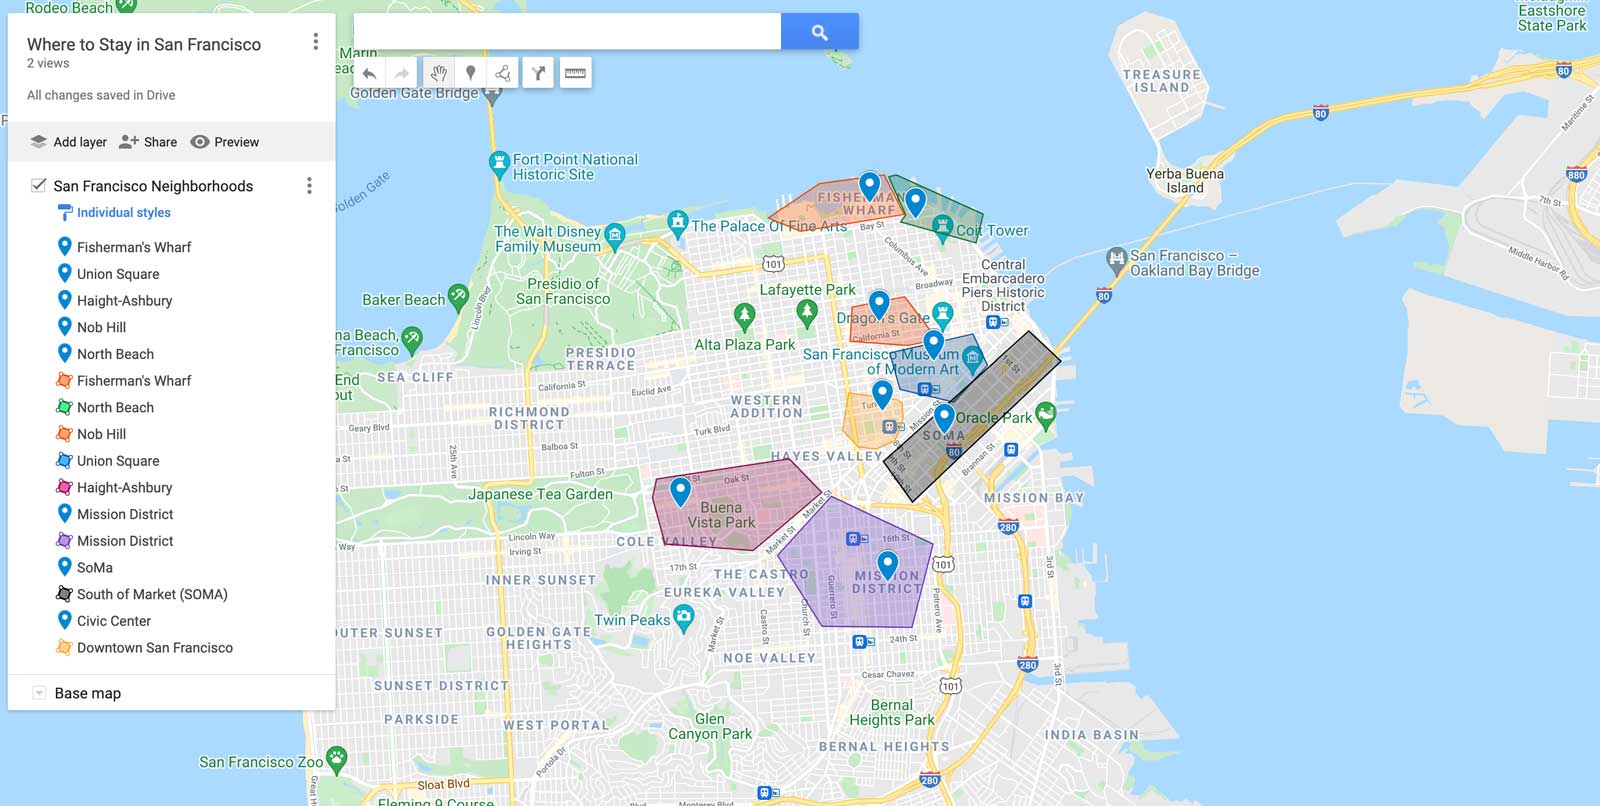 where to stay in san francisco map of neighborhoods